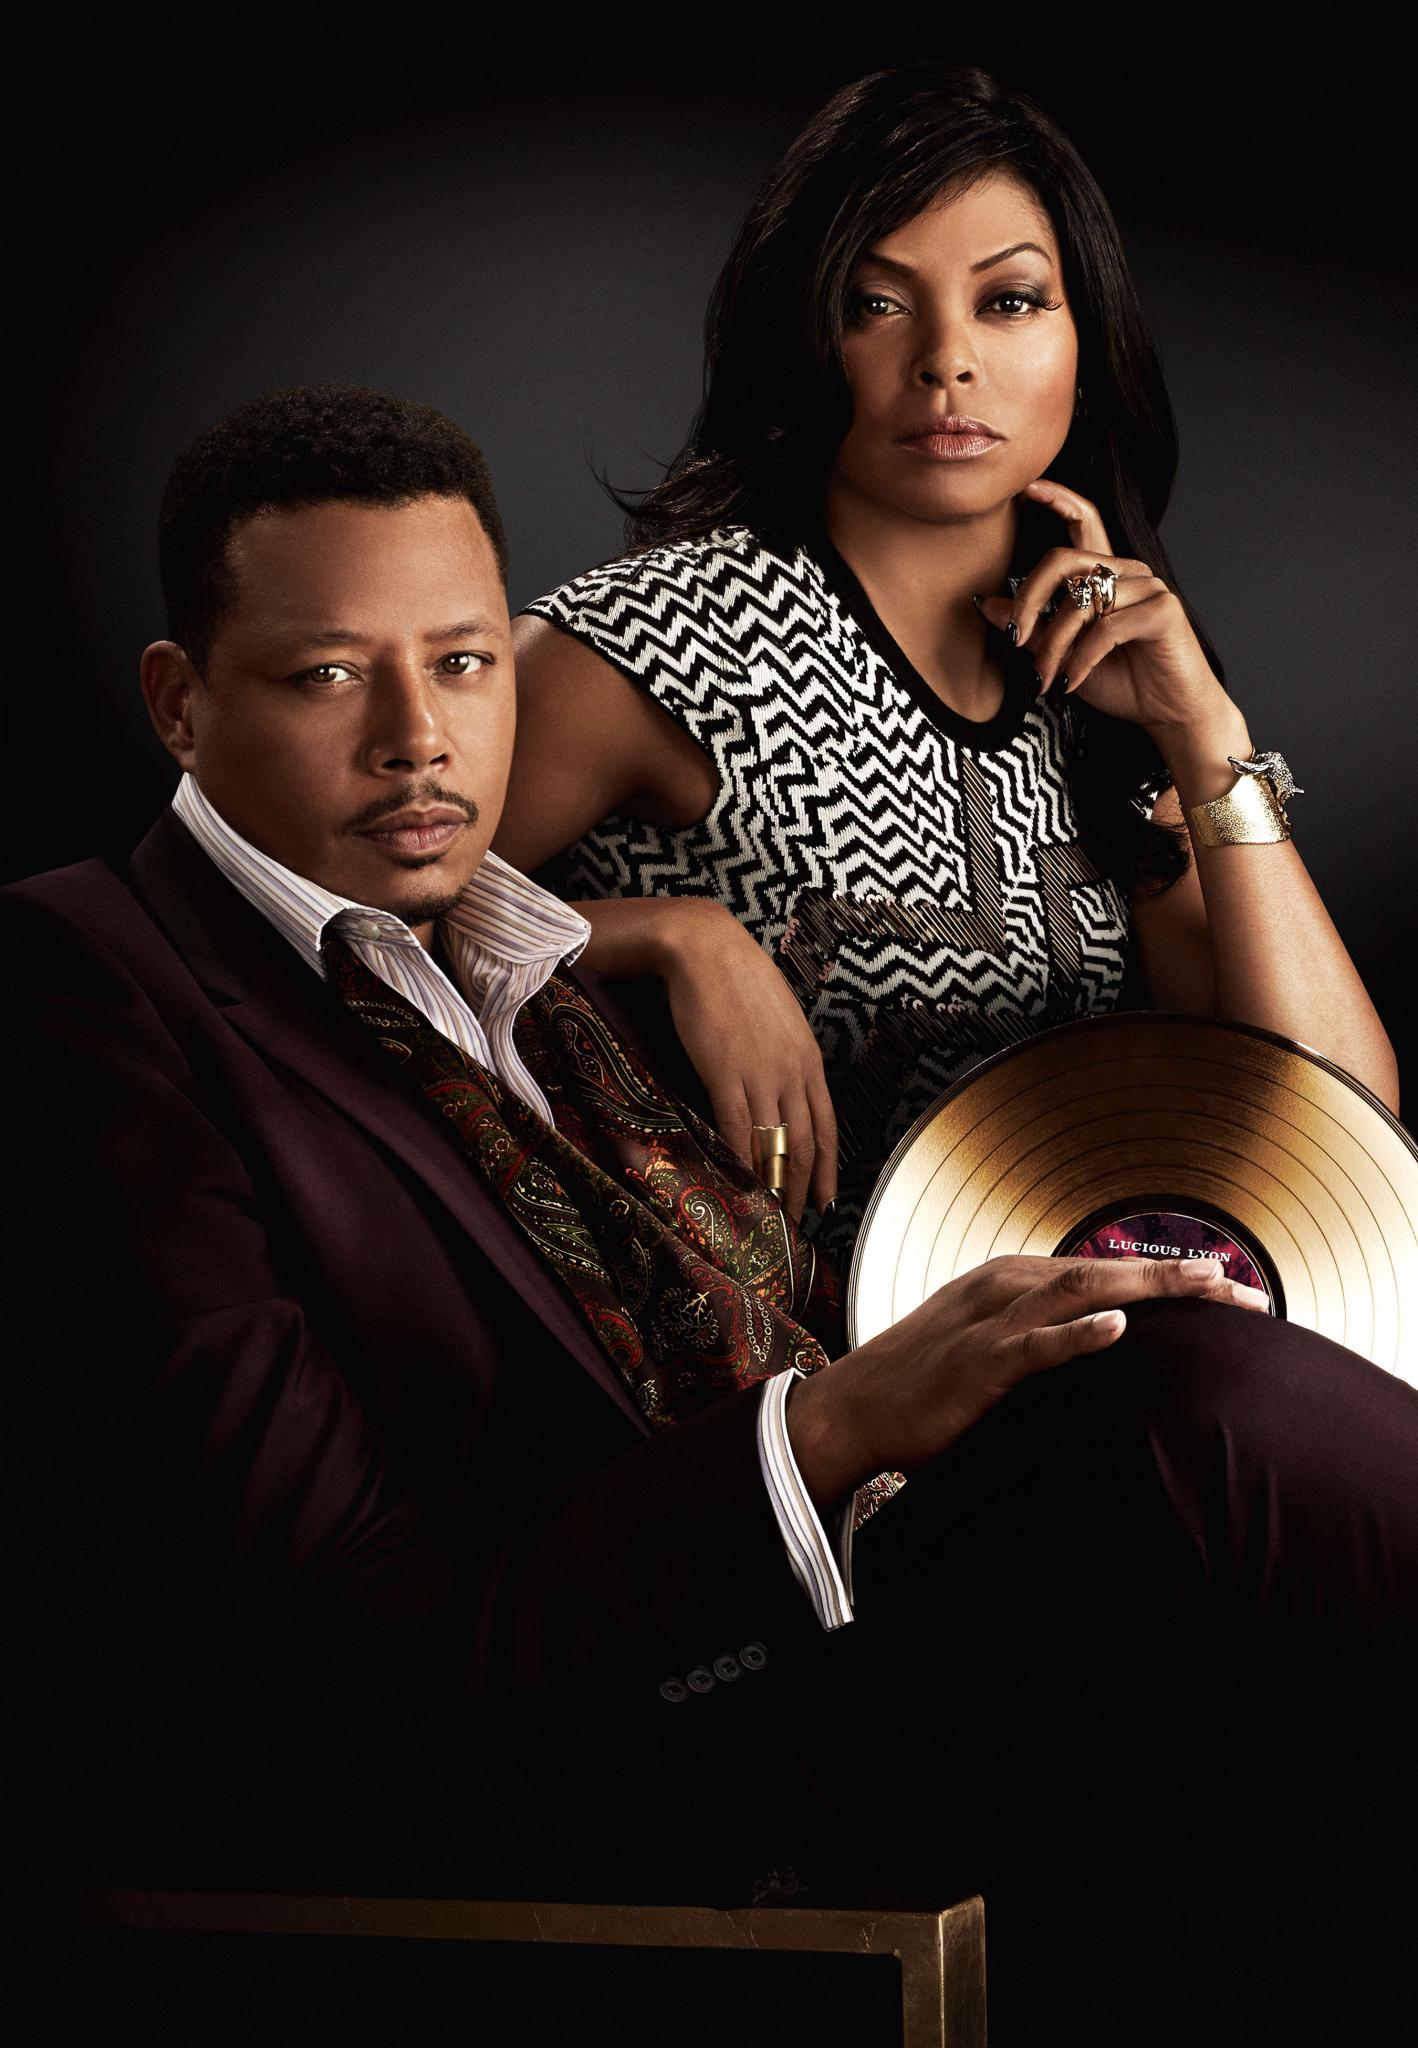 How Well Do You Know the Actors of 'Empire'? Take Our Quiz!
